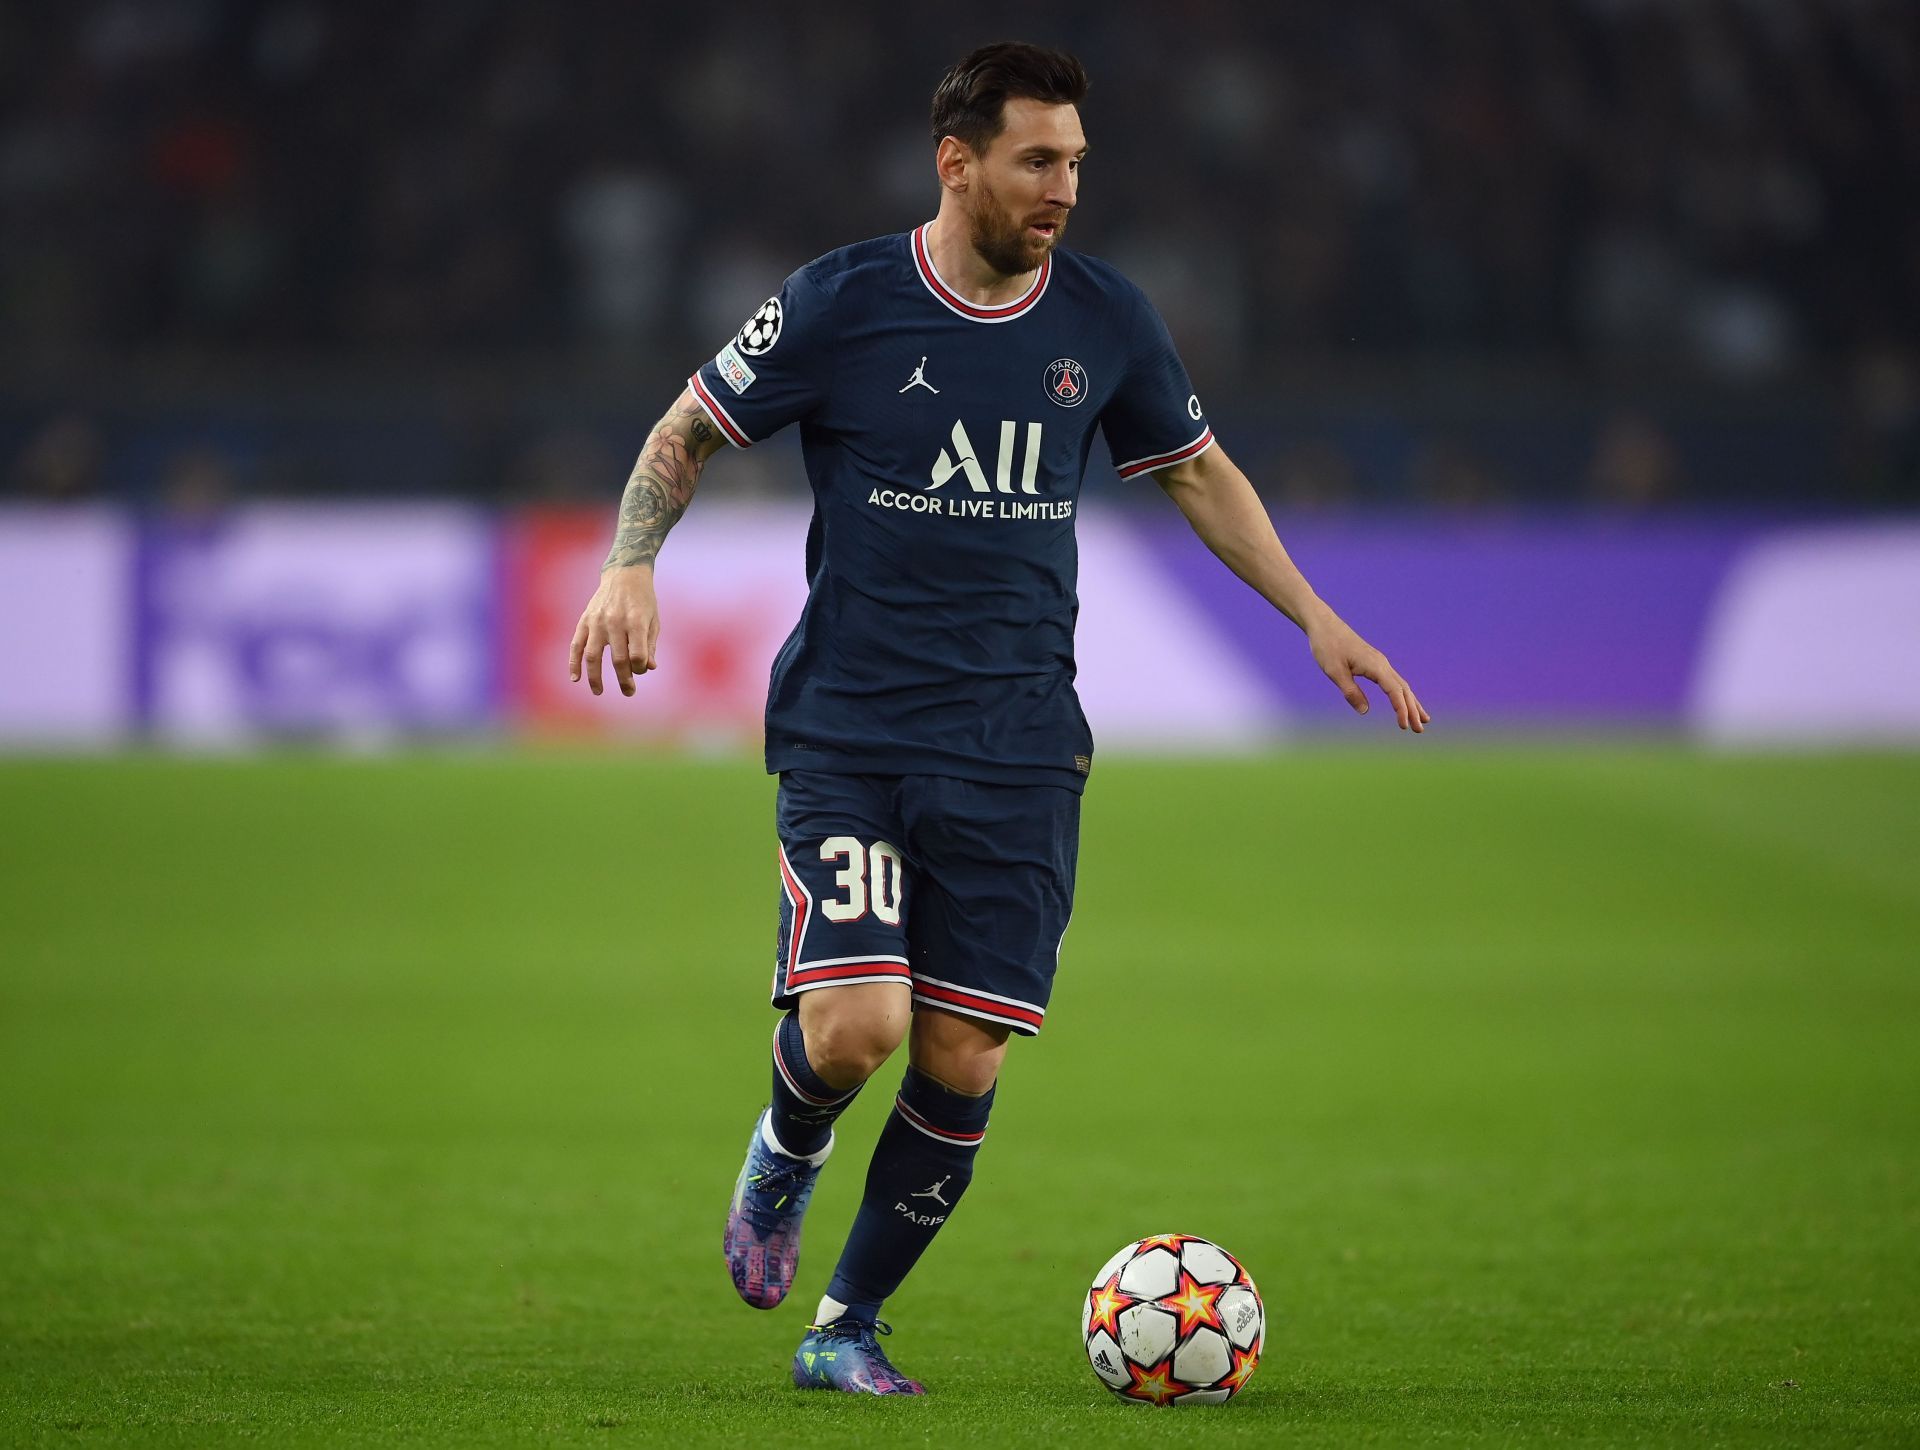 Lionel Messi has made a subdued start to life at PSG.